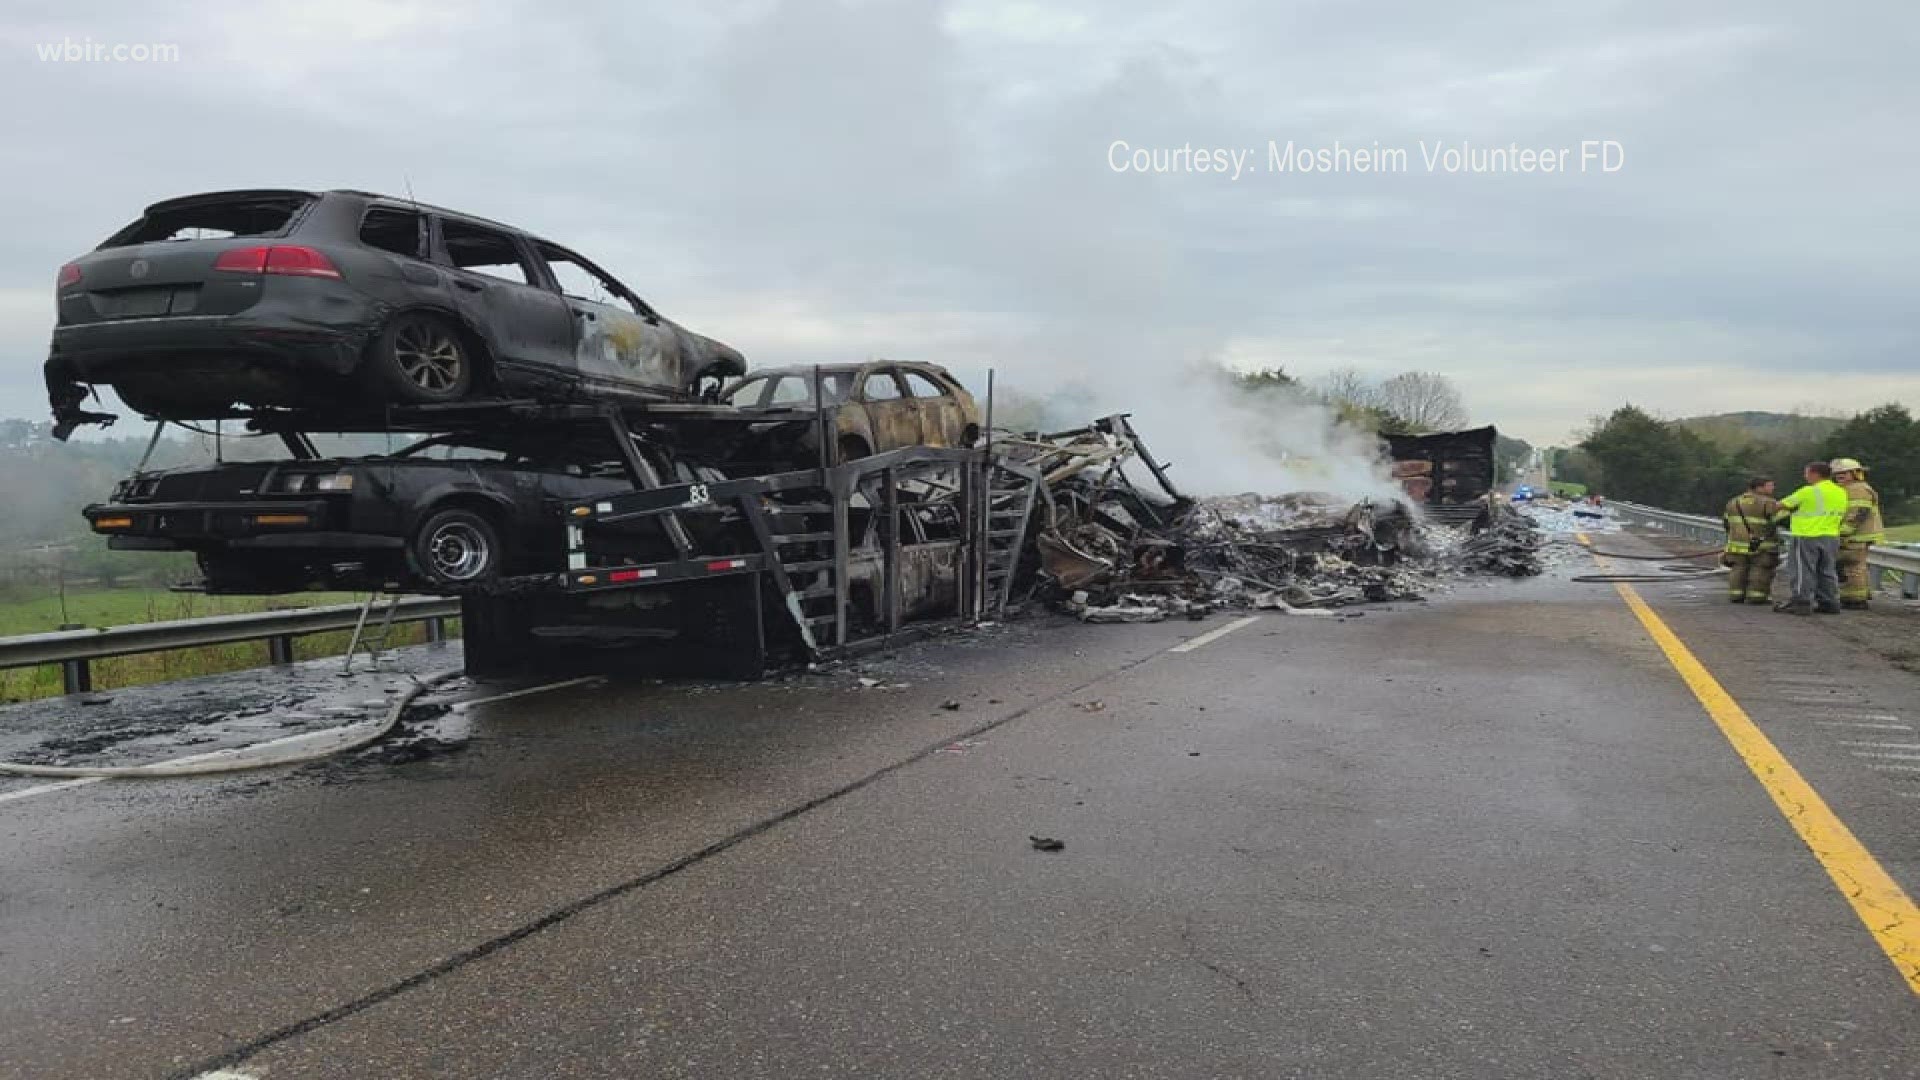 Officials said that one of the trucks hit the other from behind. Both caught fire and were completely destroyed.